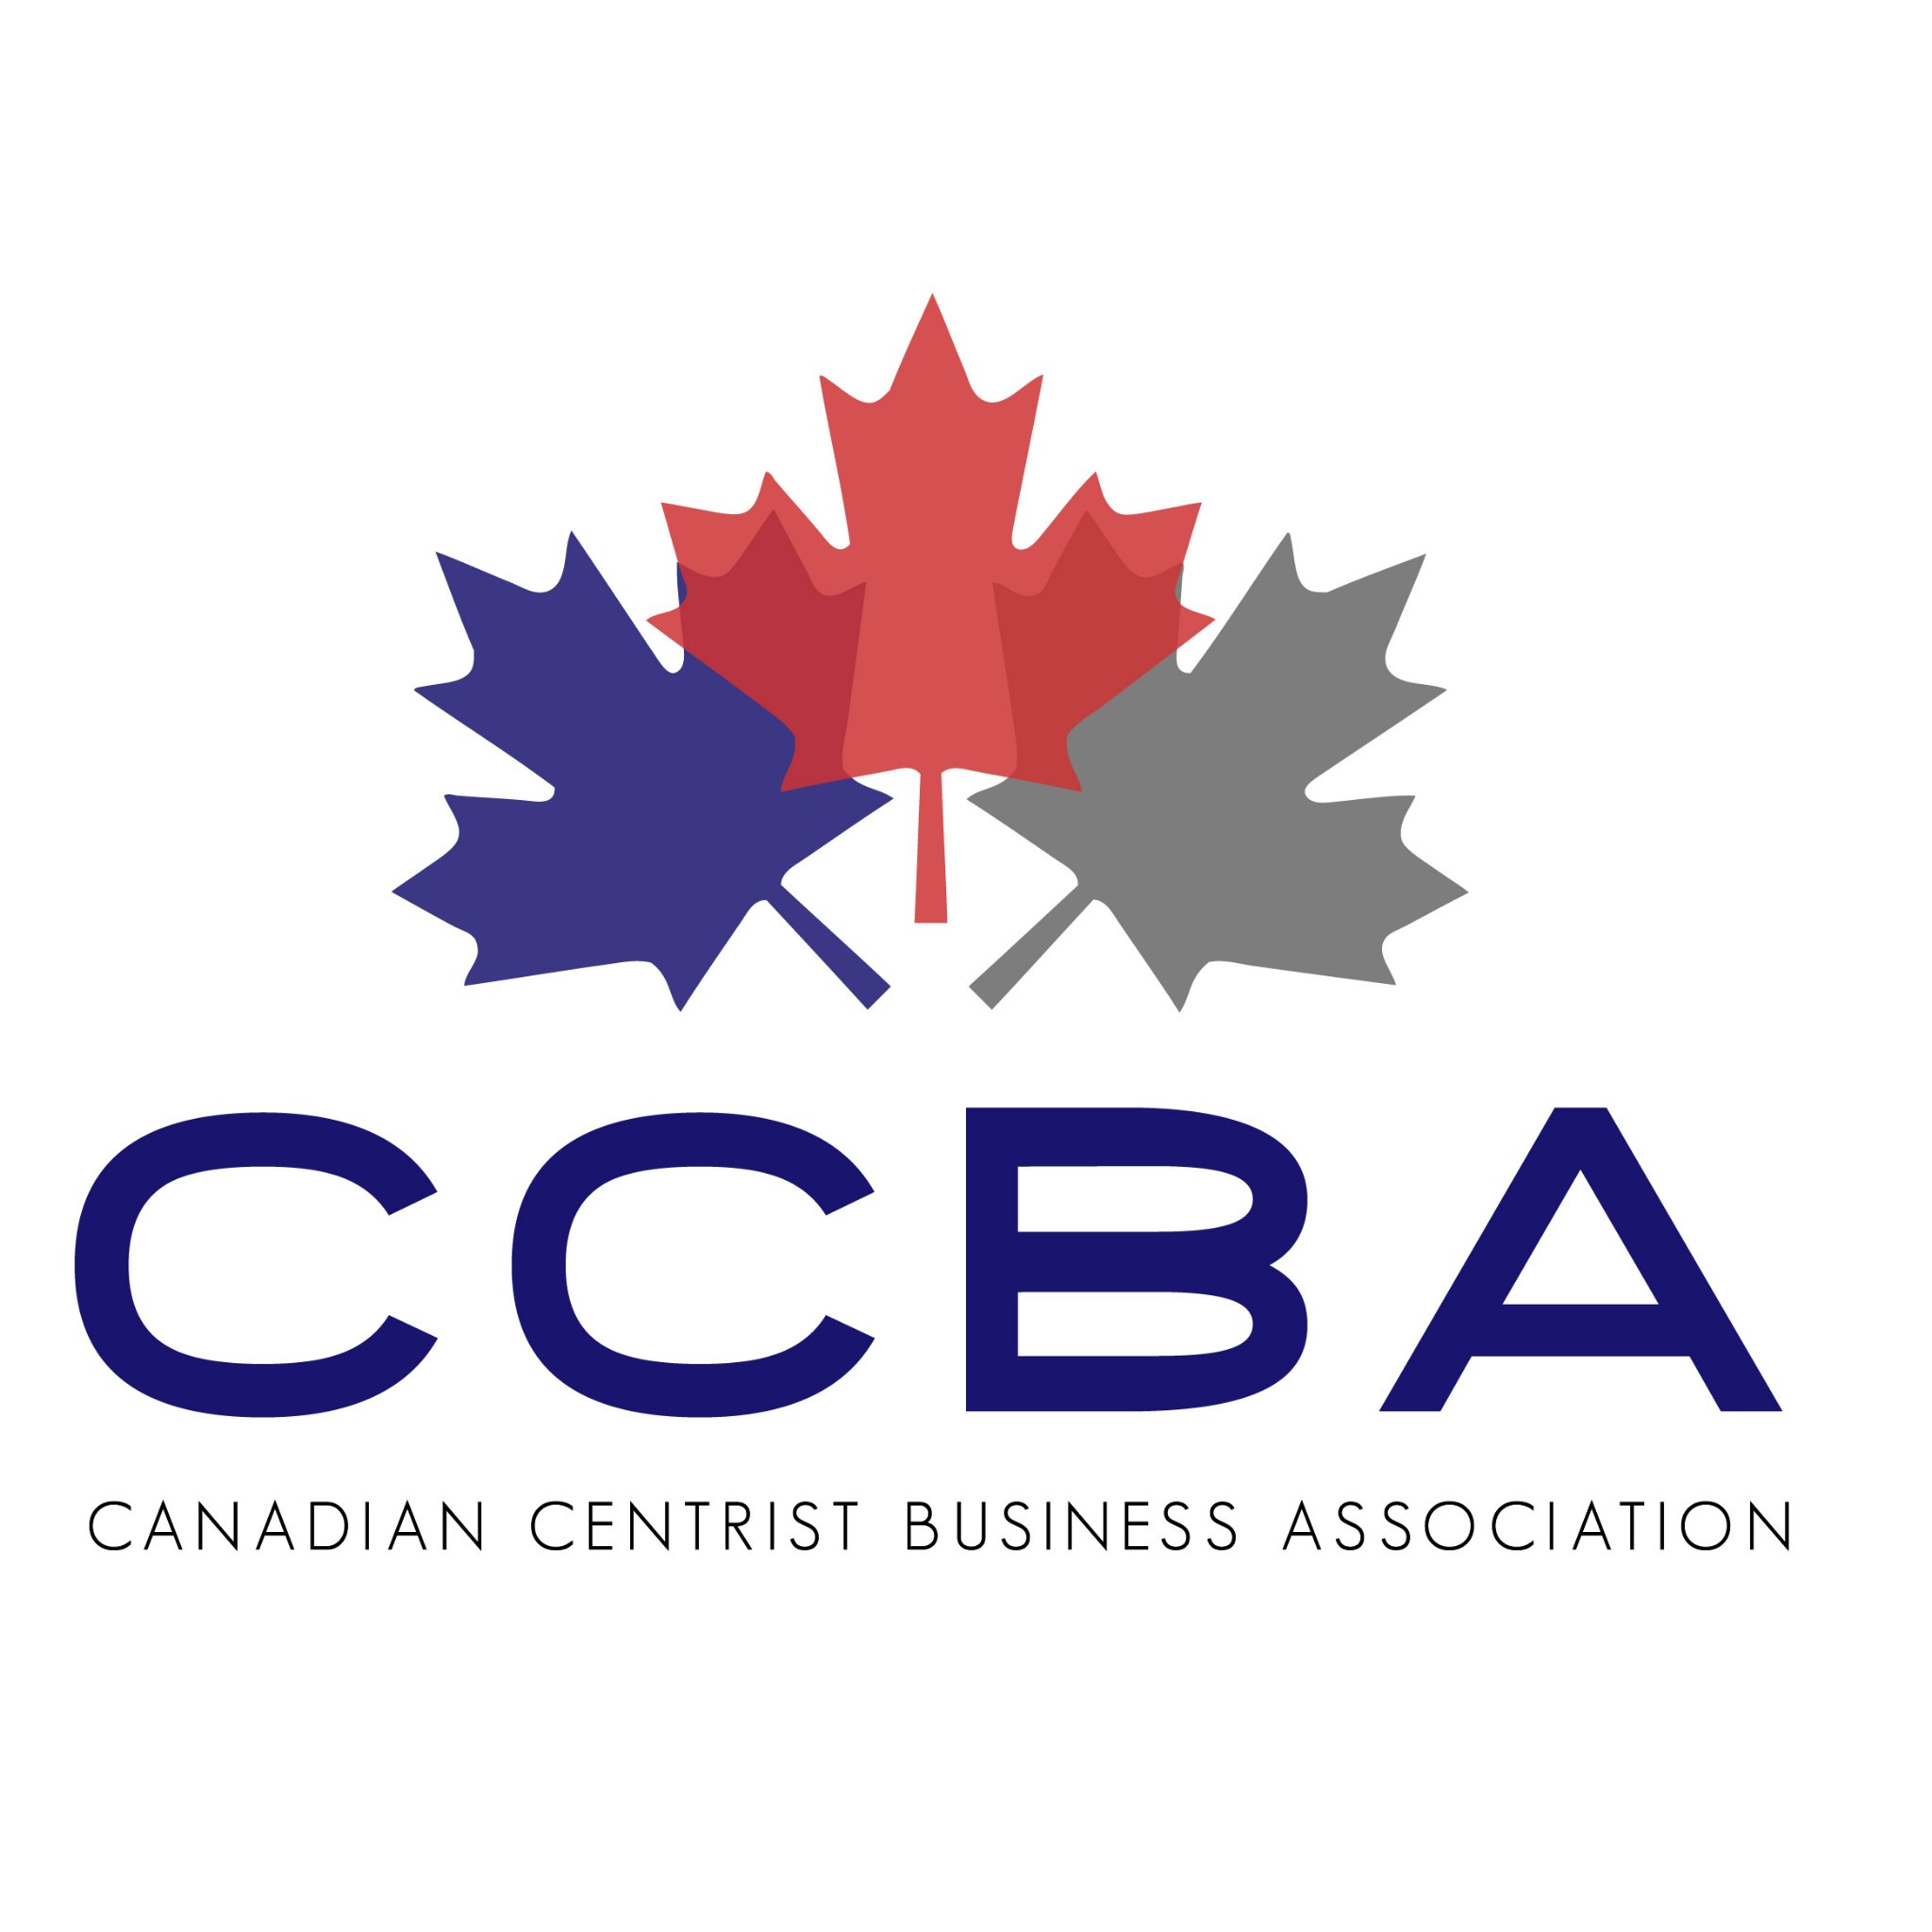 The CCBA is a business association for centrists to advance the interests of its members. [more to come]